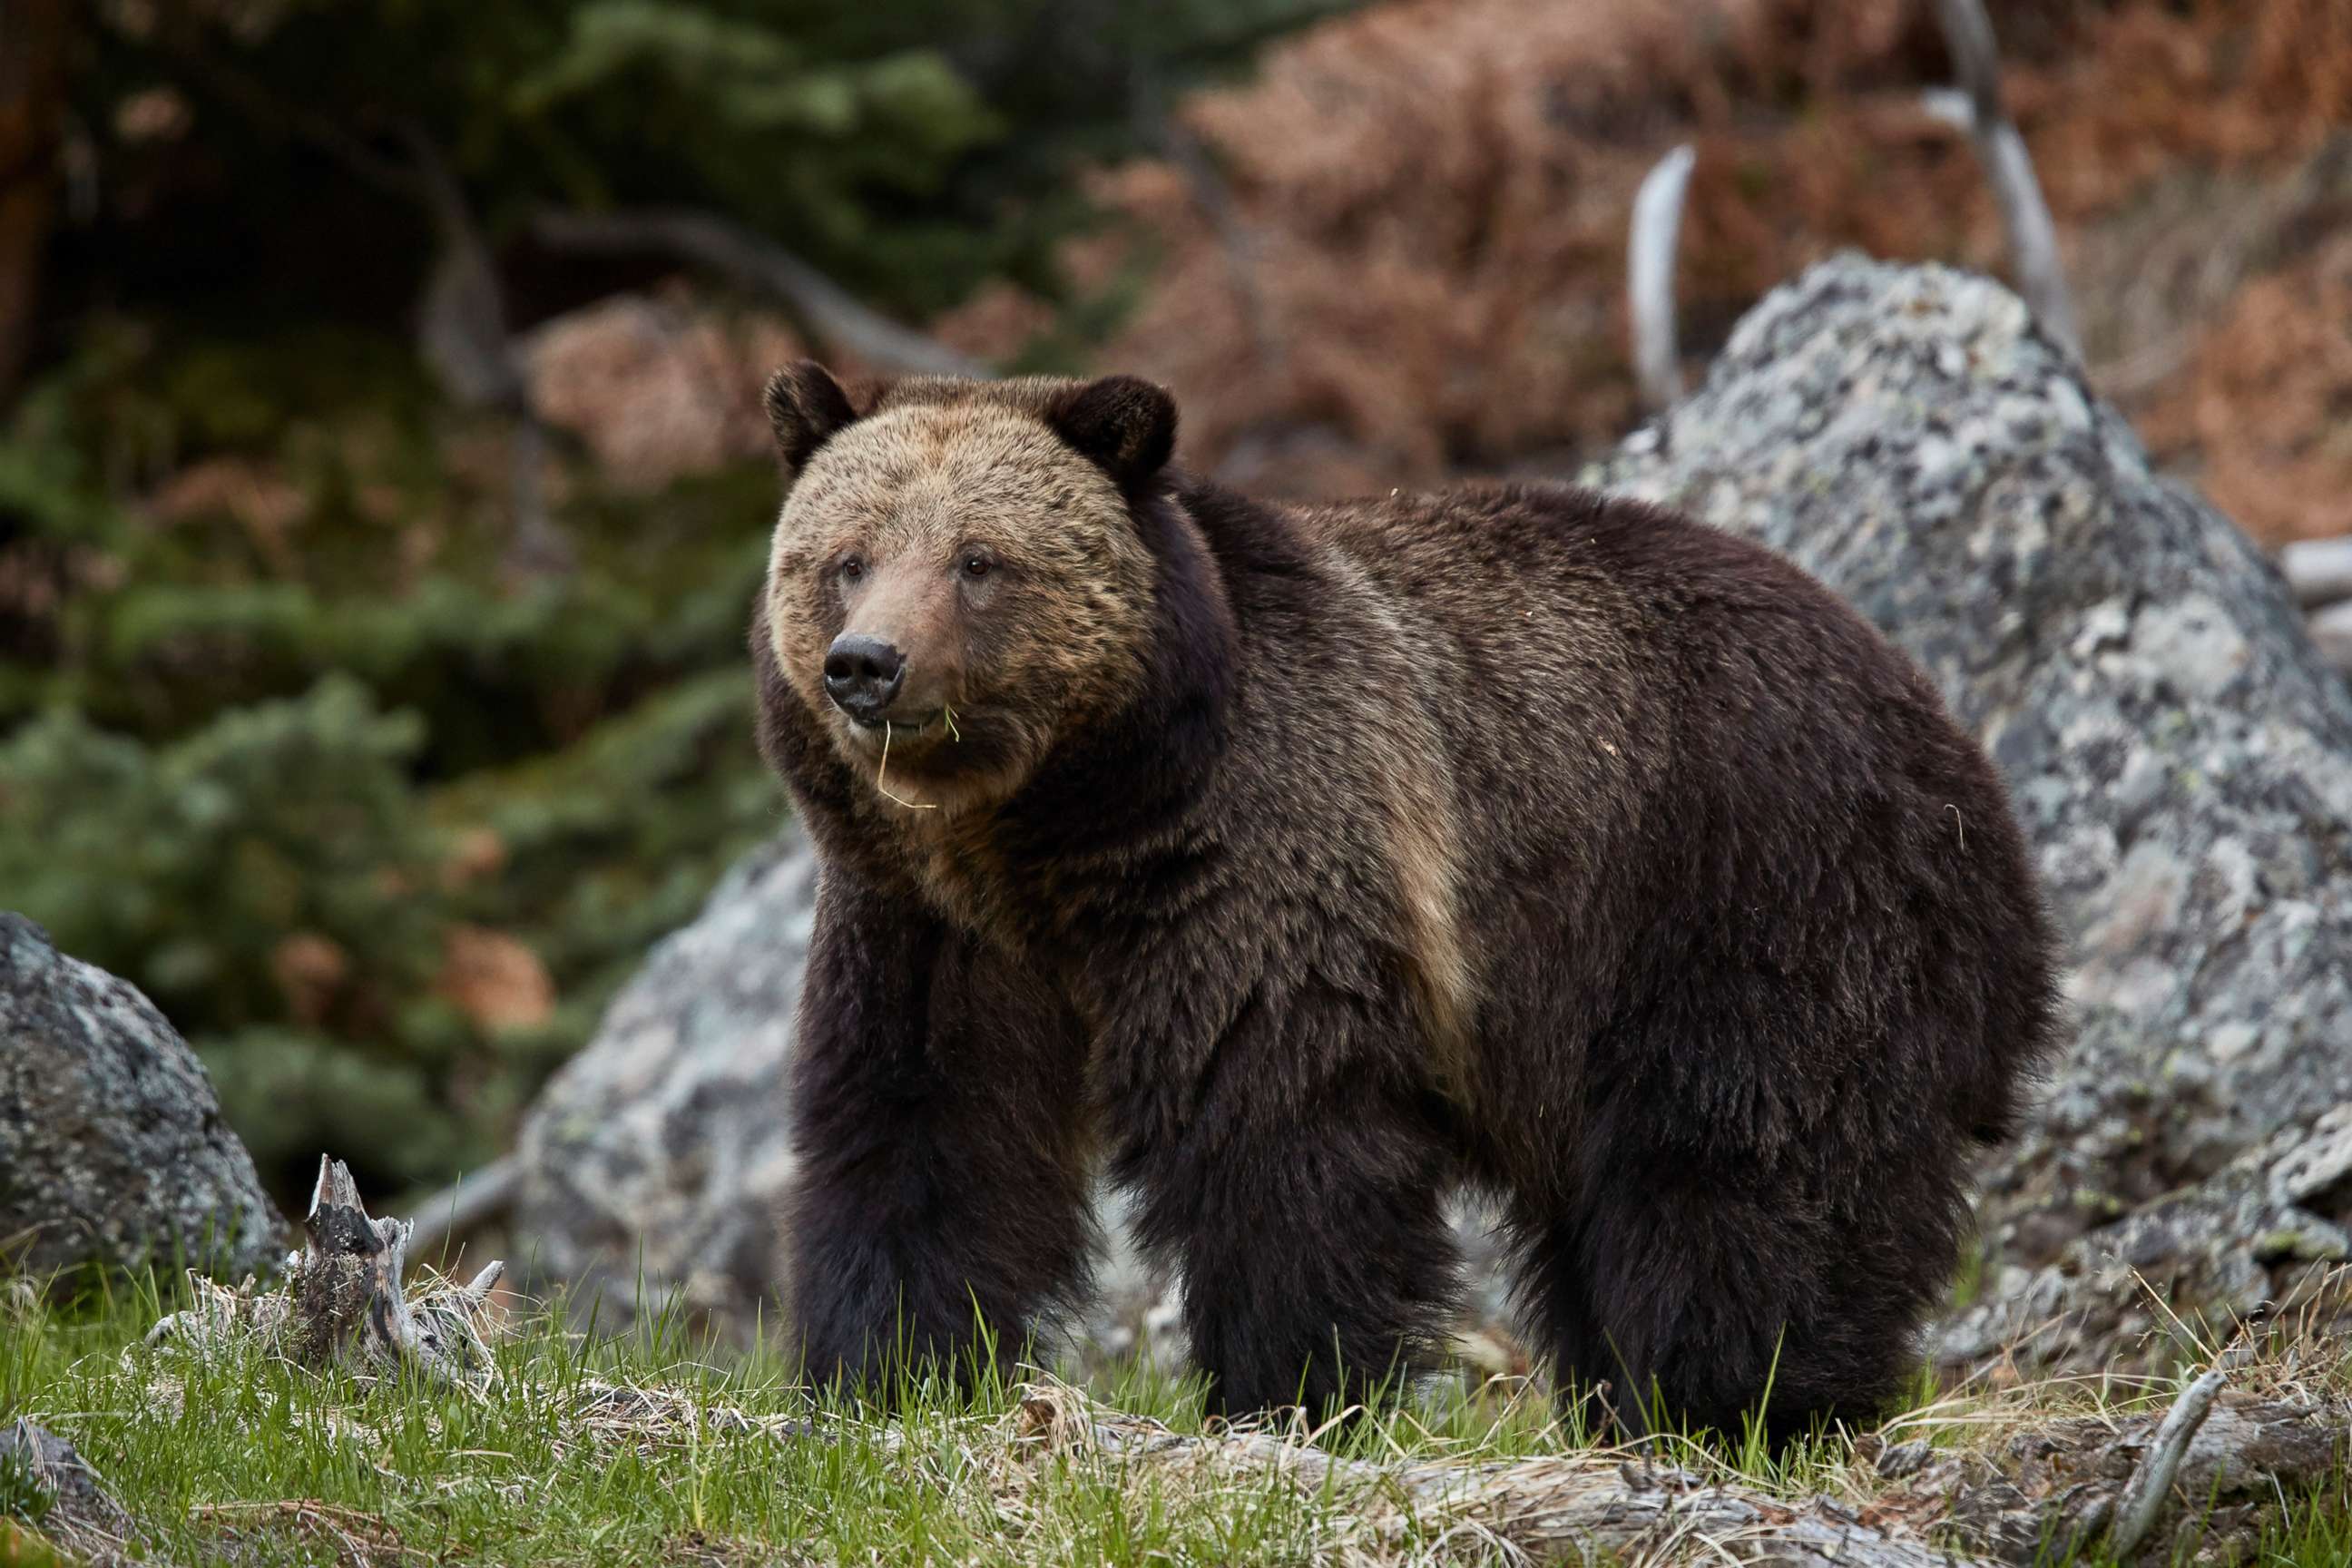 PHOTO: A grizzly Bear is pictured in Yellowstone National Park in Wyoming, in this undated stock photo.